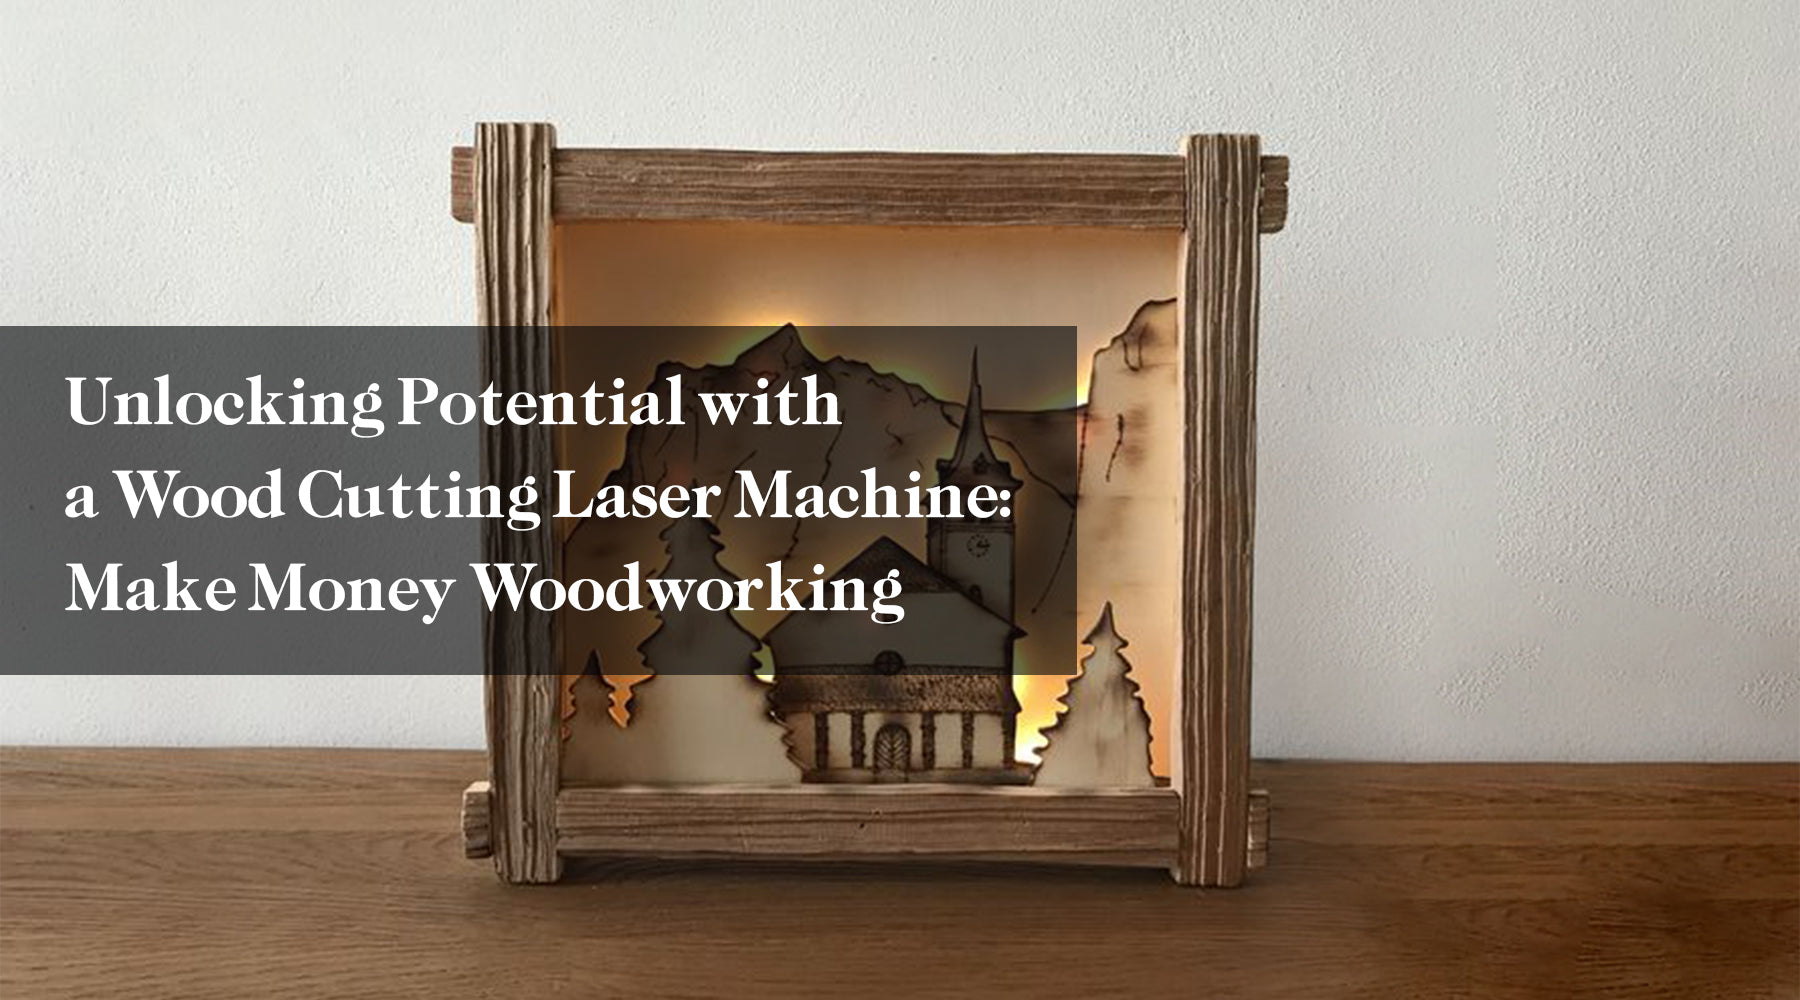 Unlocking Potential with a Wood Cutting Laser Machine: Make Money Woodworking